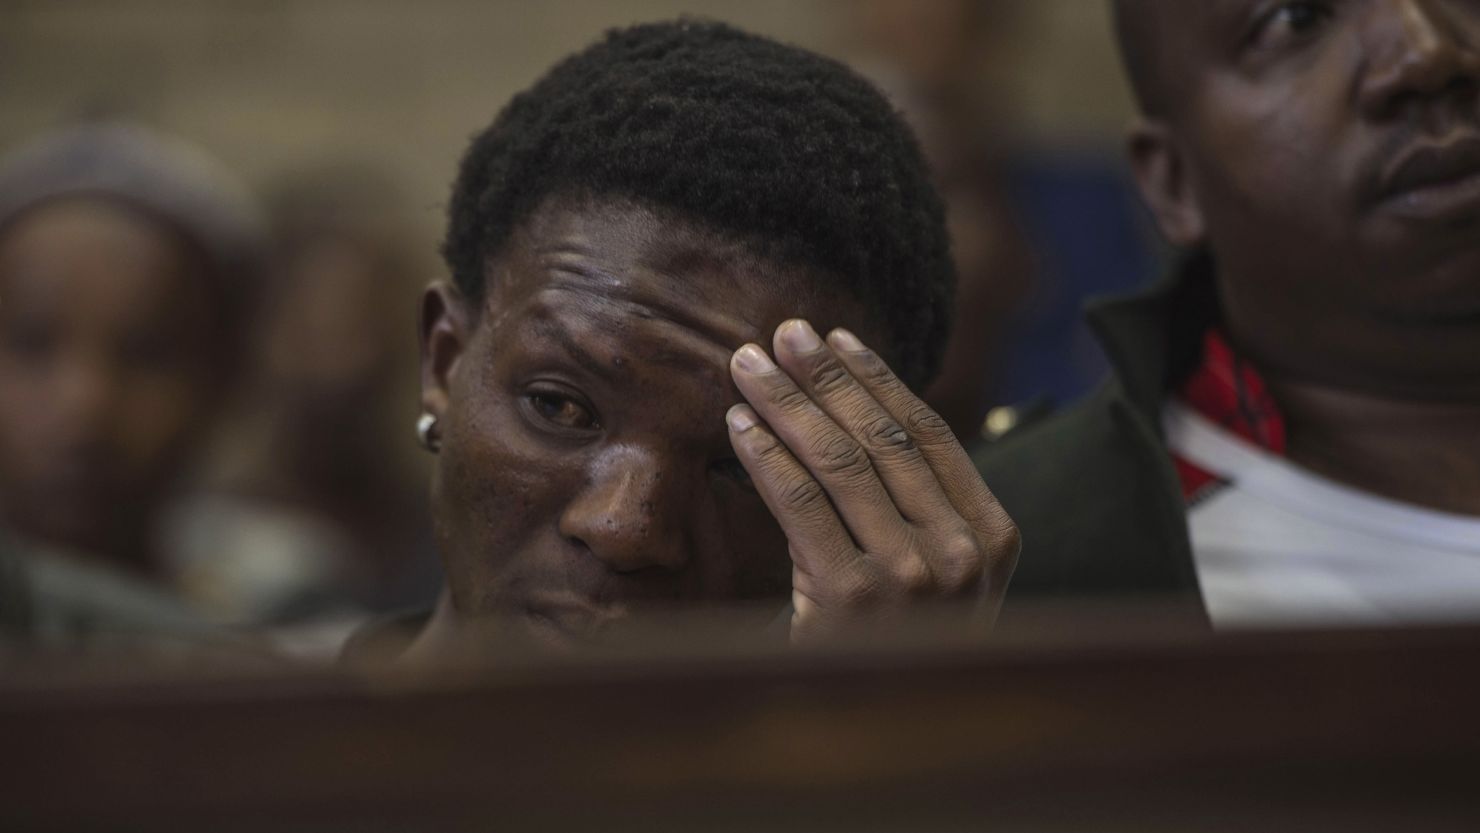 Victim of the assault,Victor Mlotshwa looks on in court during the first hearing of the assault charge